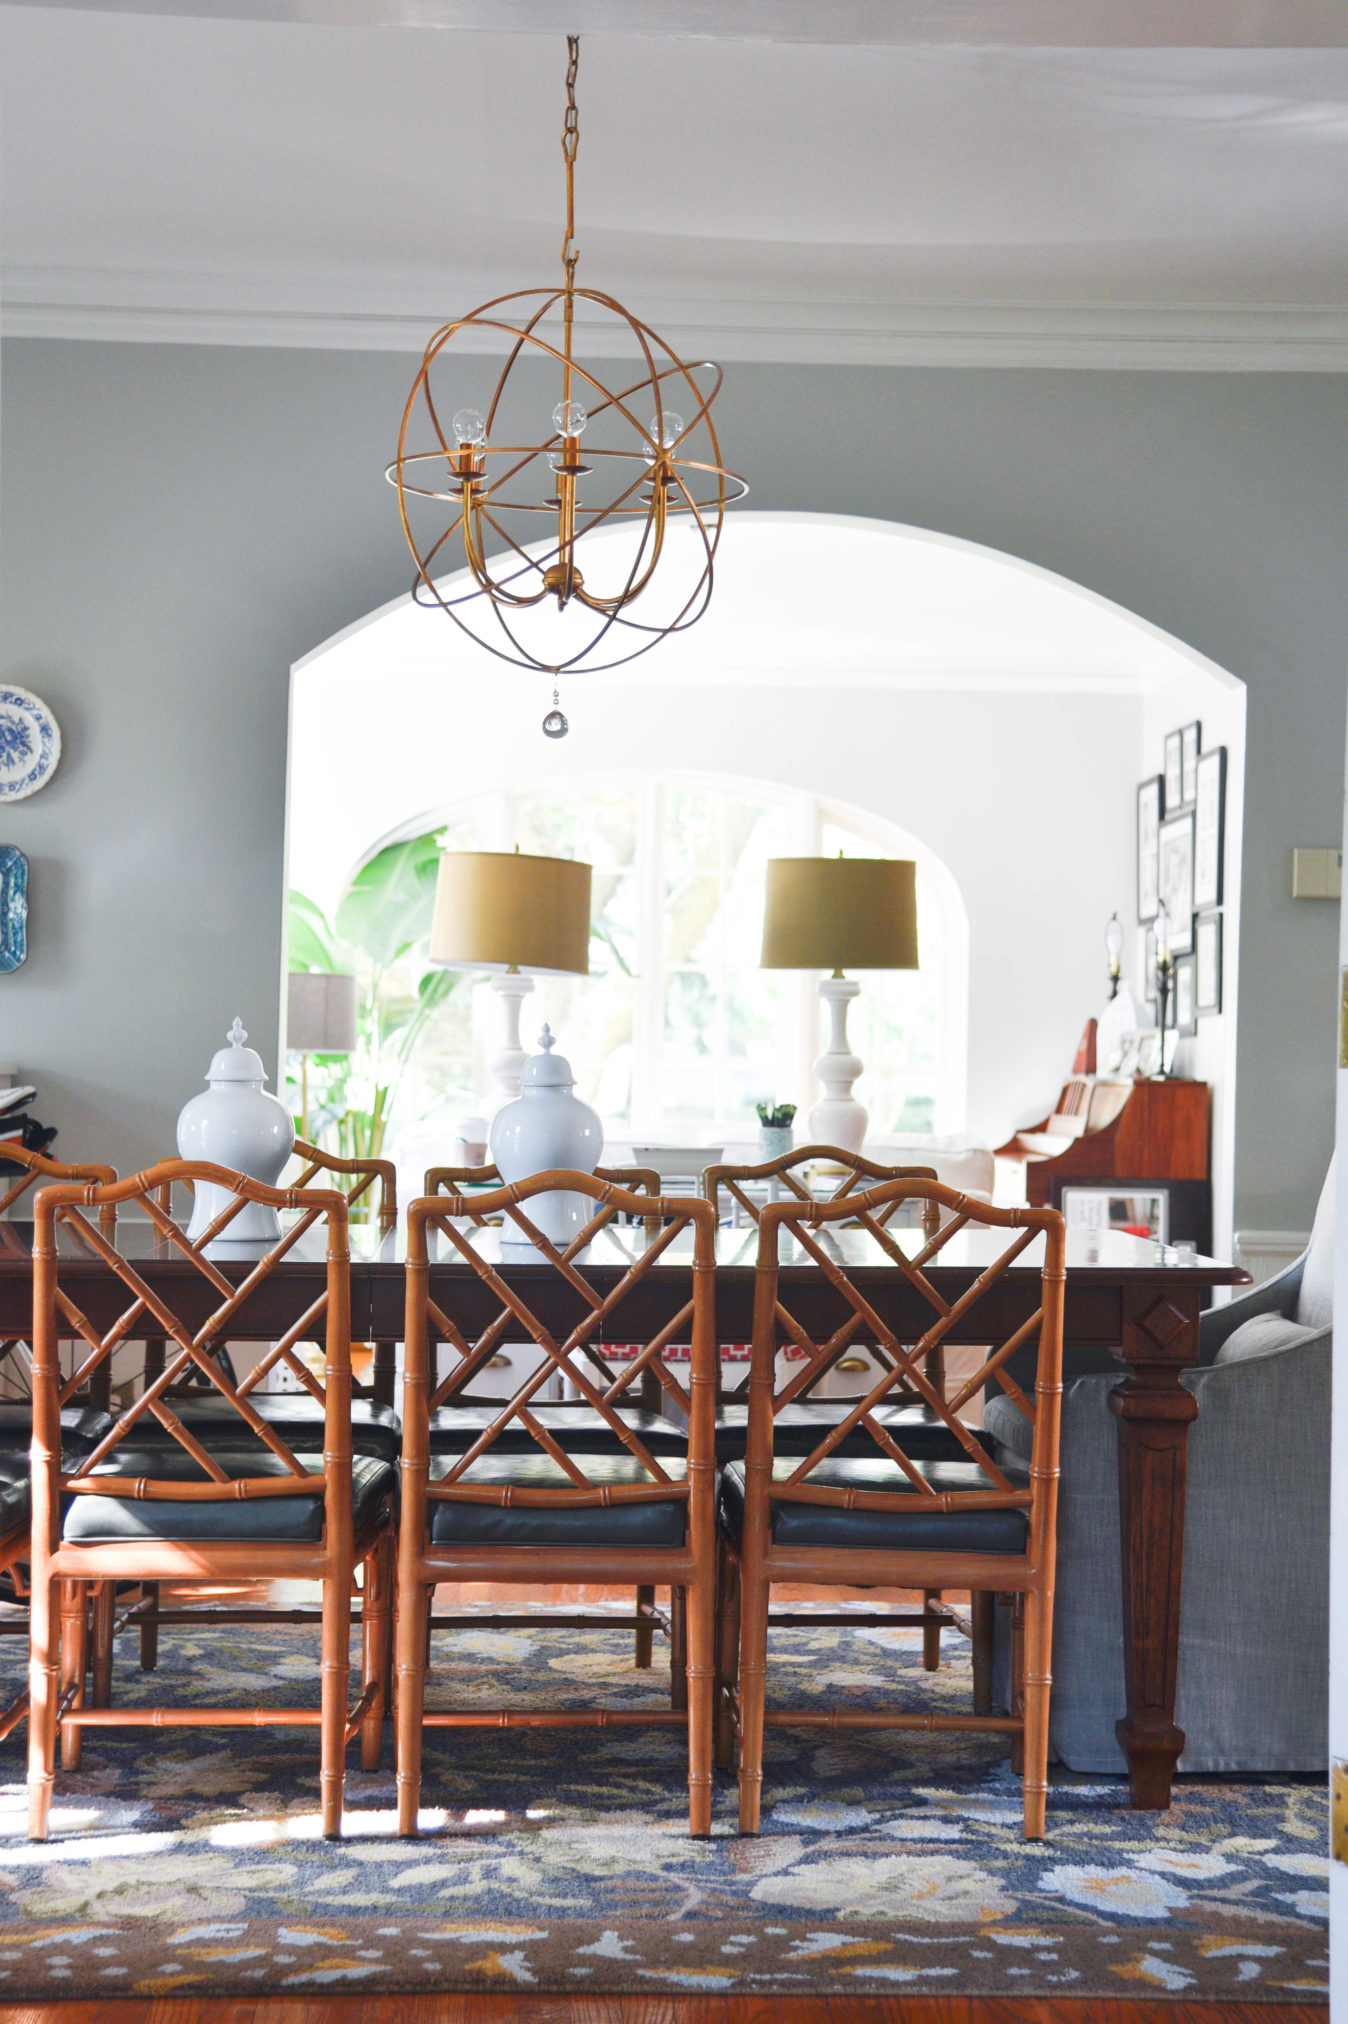 Home Bloggers Home Tour dining room styling tips www.homewithkeki.com